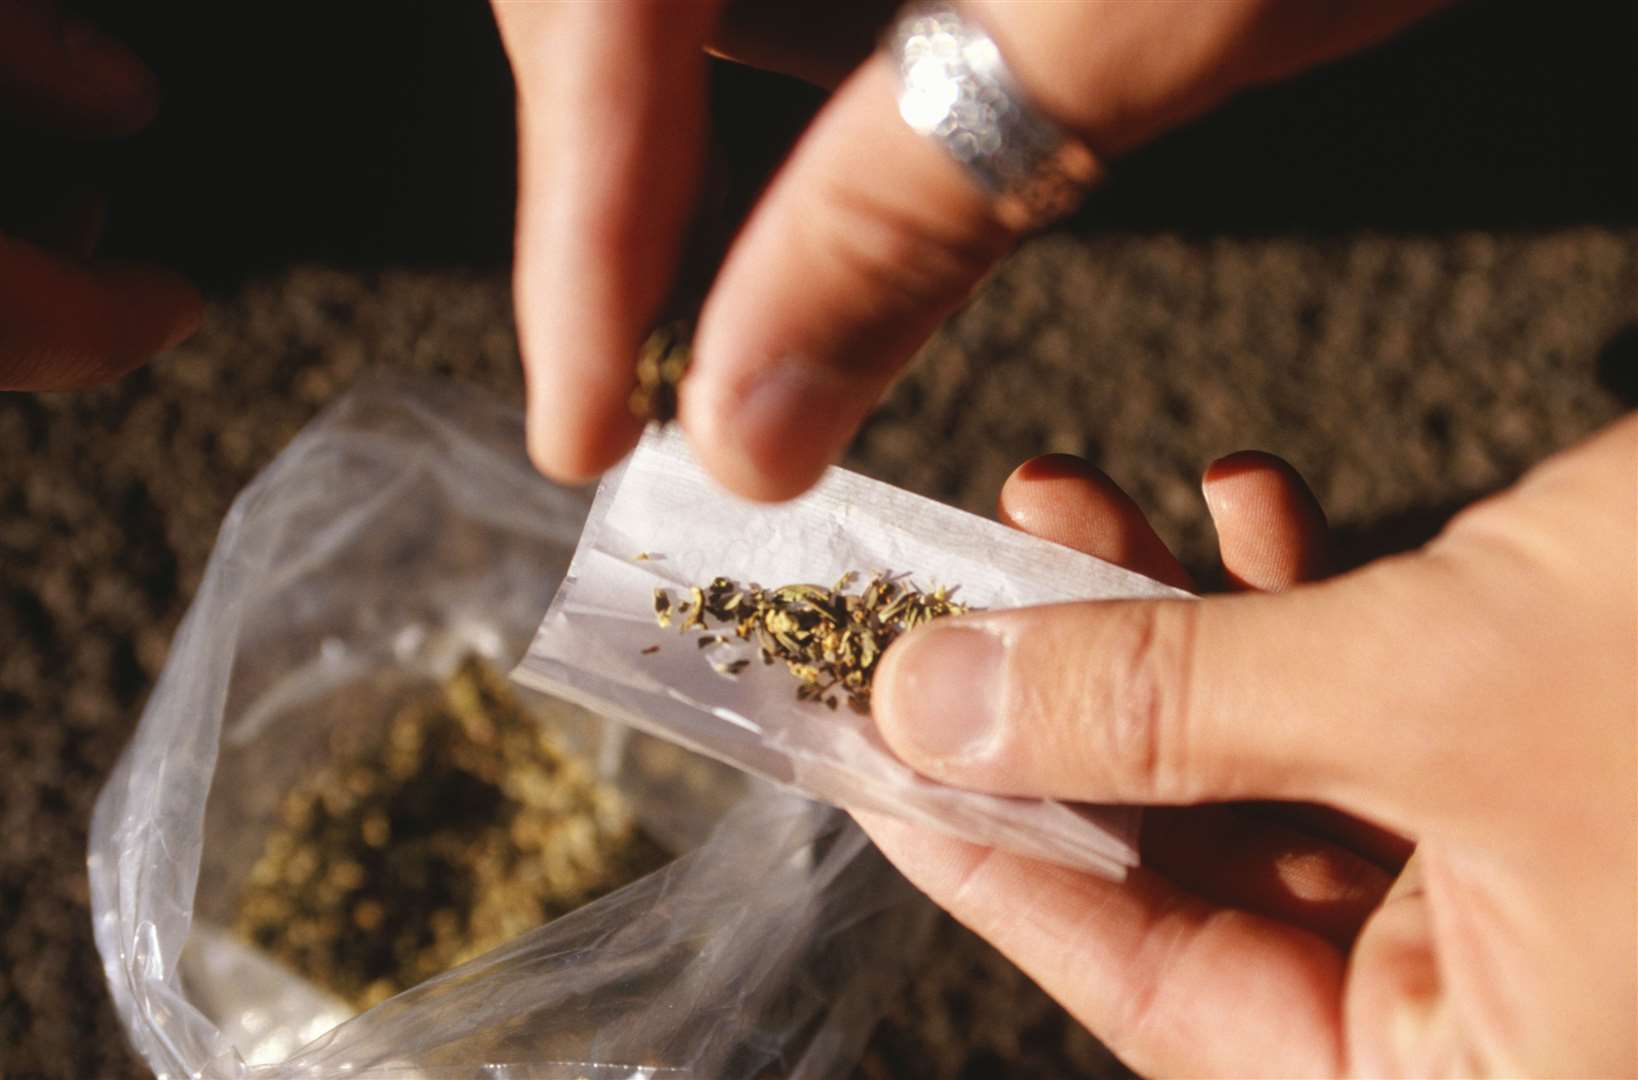 Gilroy told the court he wasn't a cannabis user. Picture: Thinkstock Image Library